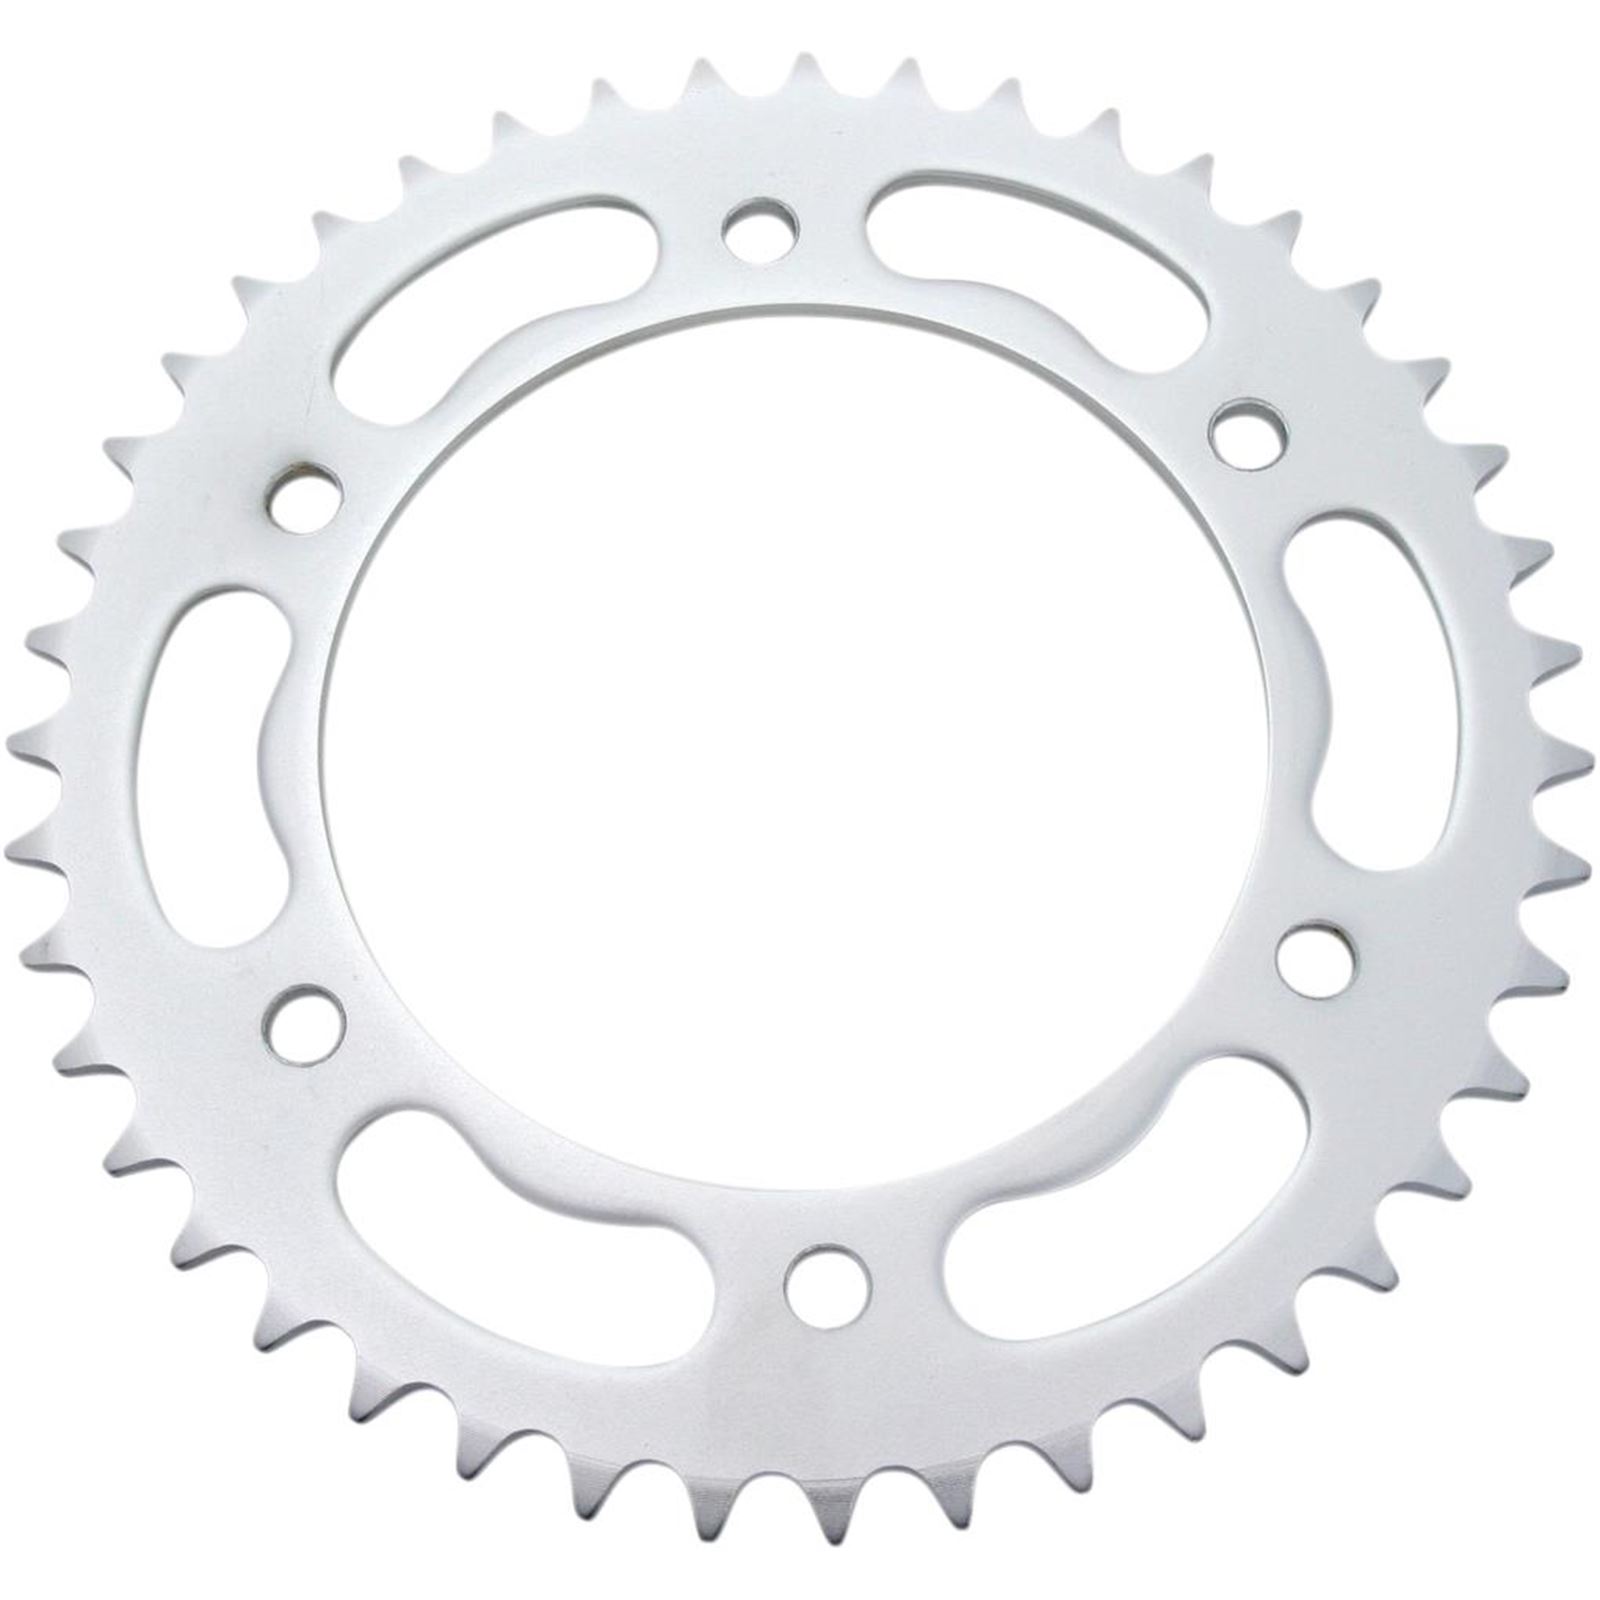 Parts Unlimited Sprocket Rear for Honda 520 - 44-Tooth